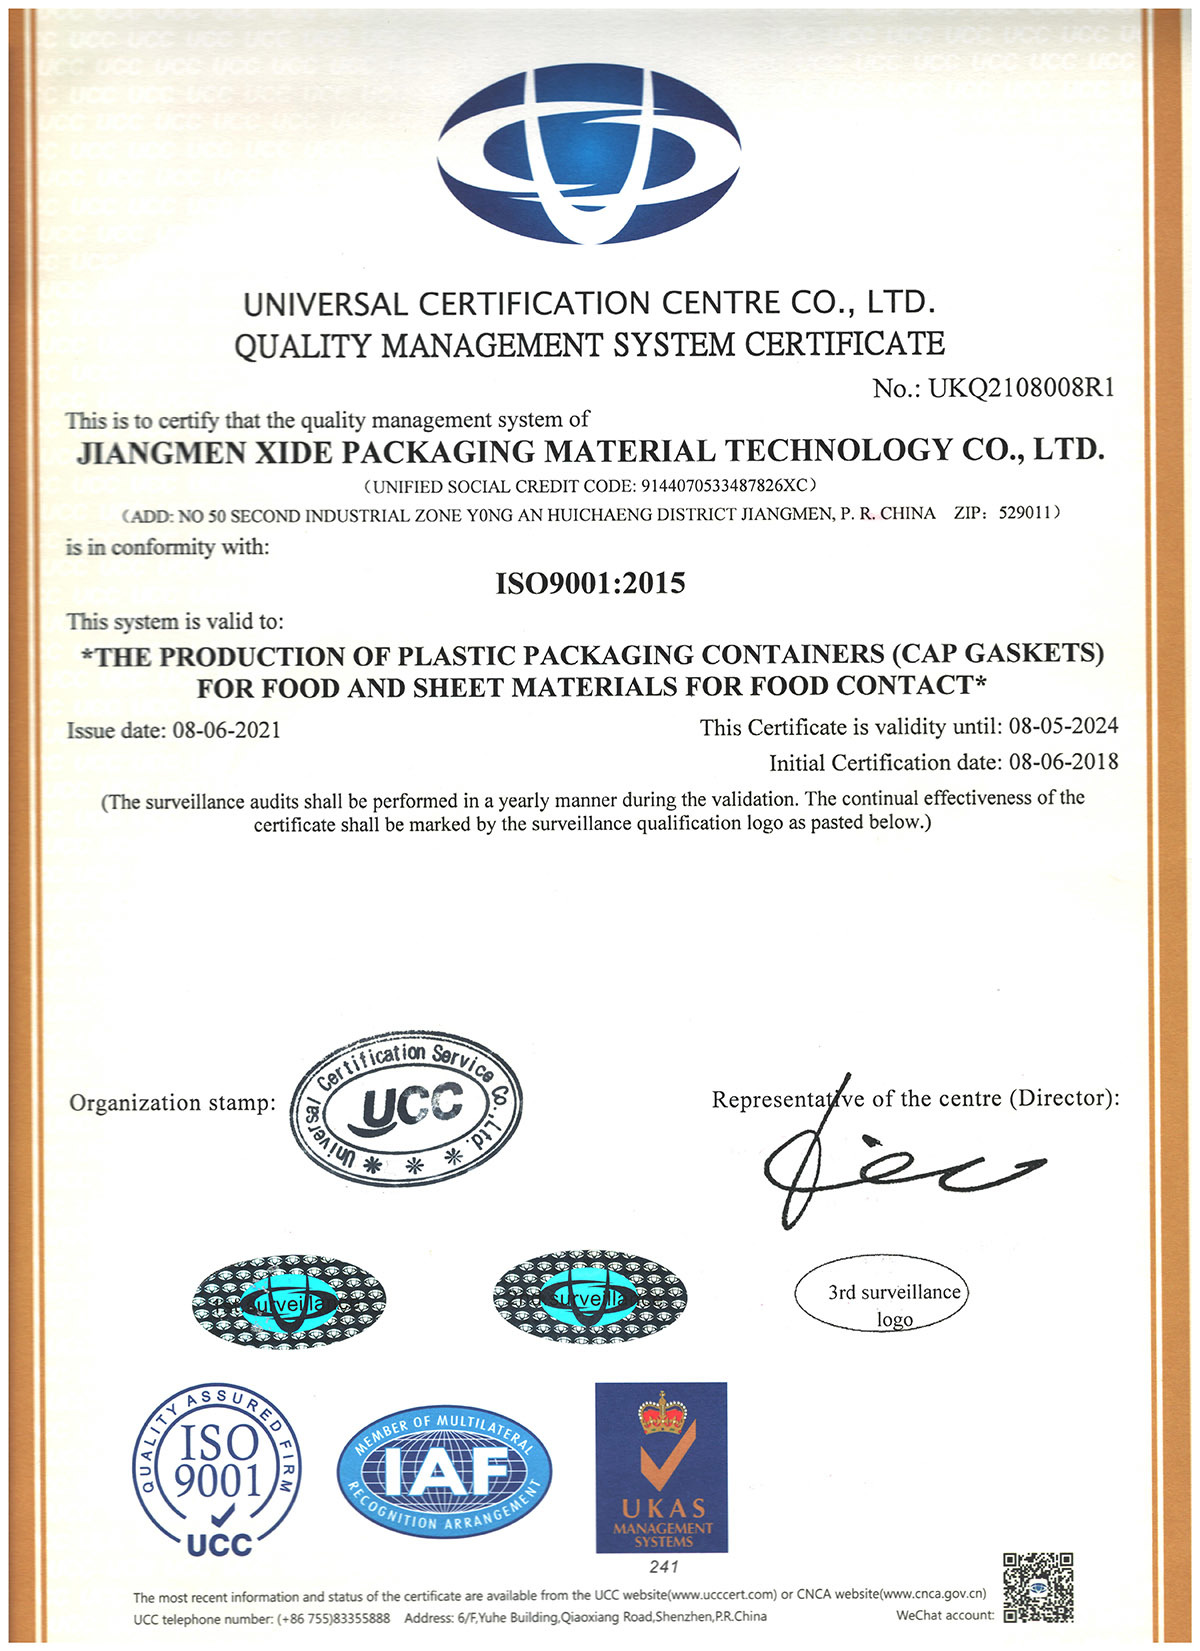 Certificate of Quality Management System Certification (English Version)